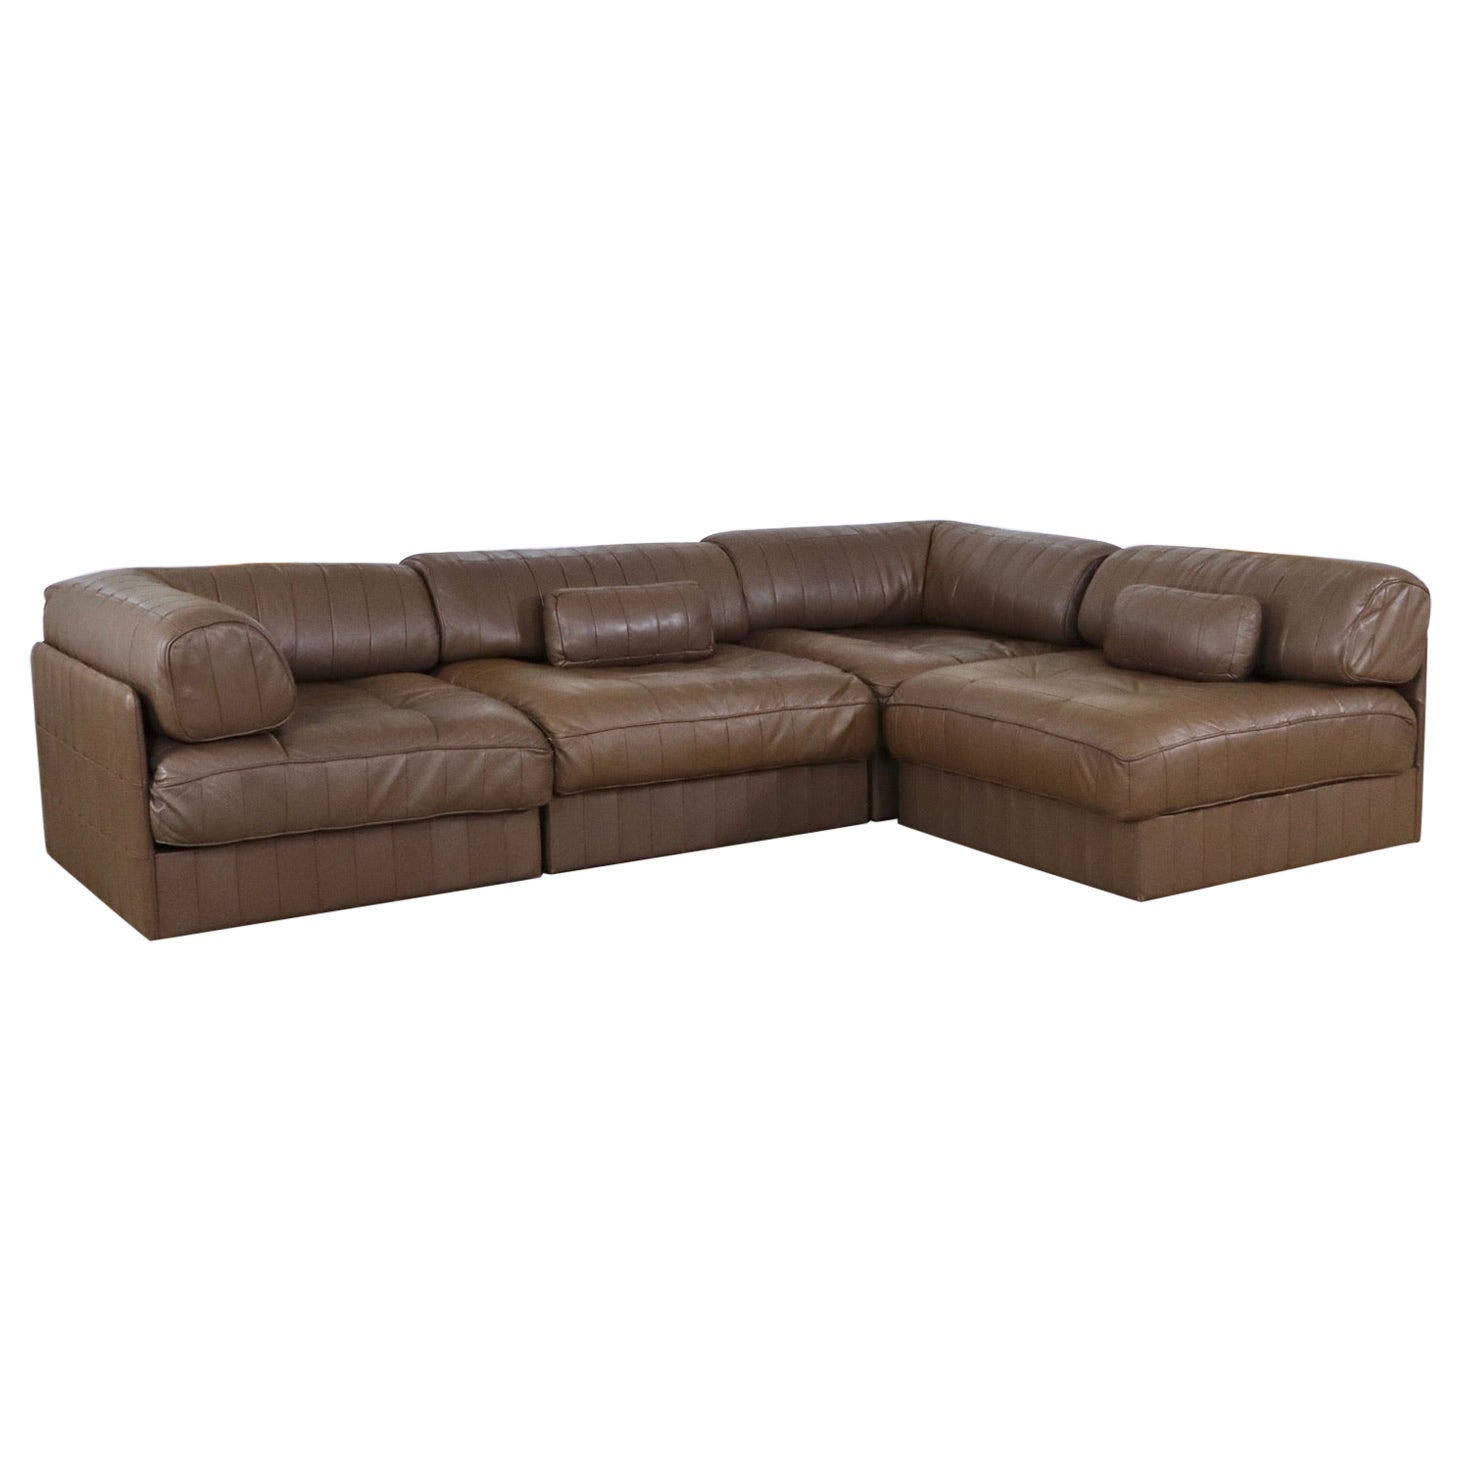 De Sede DS-88 Sofa in Chocolate Brown Patchwork Leather, 1970s